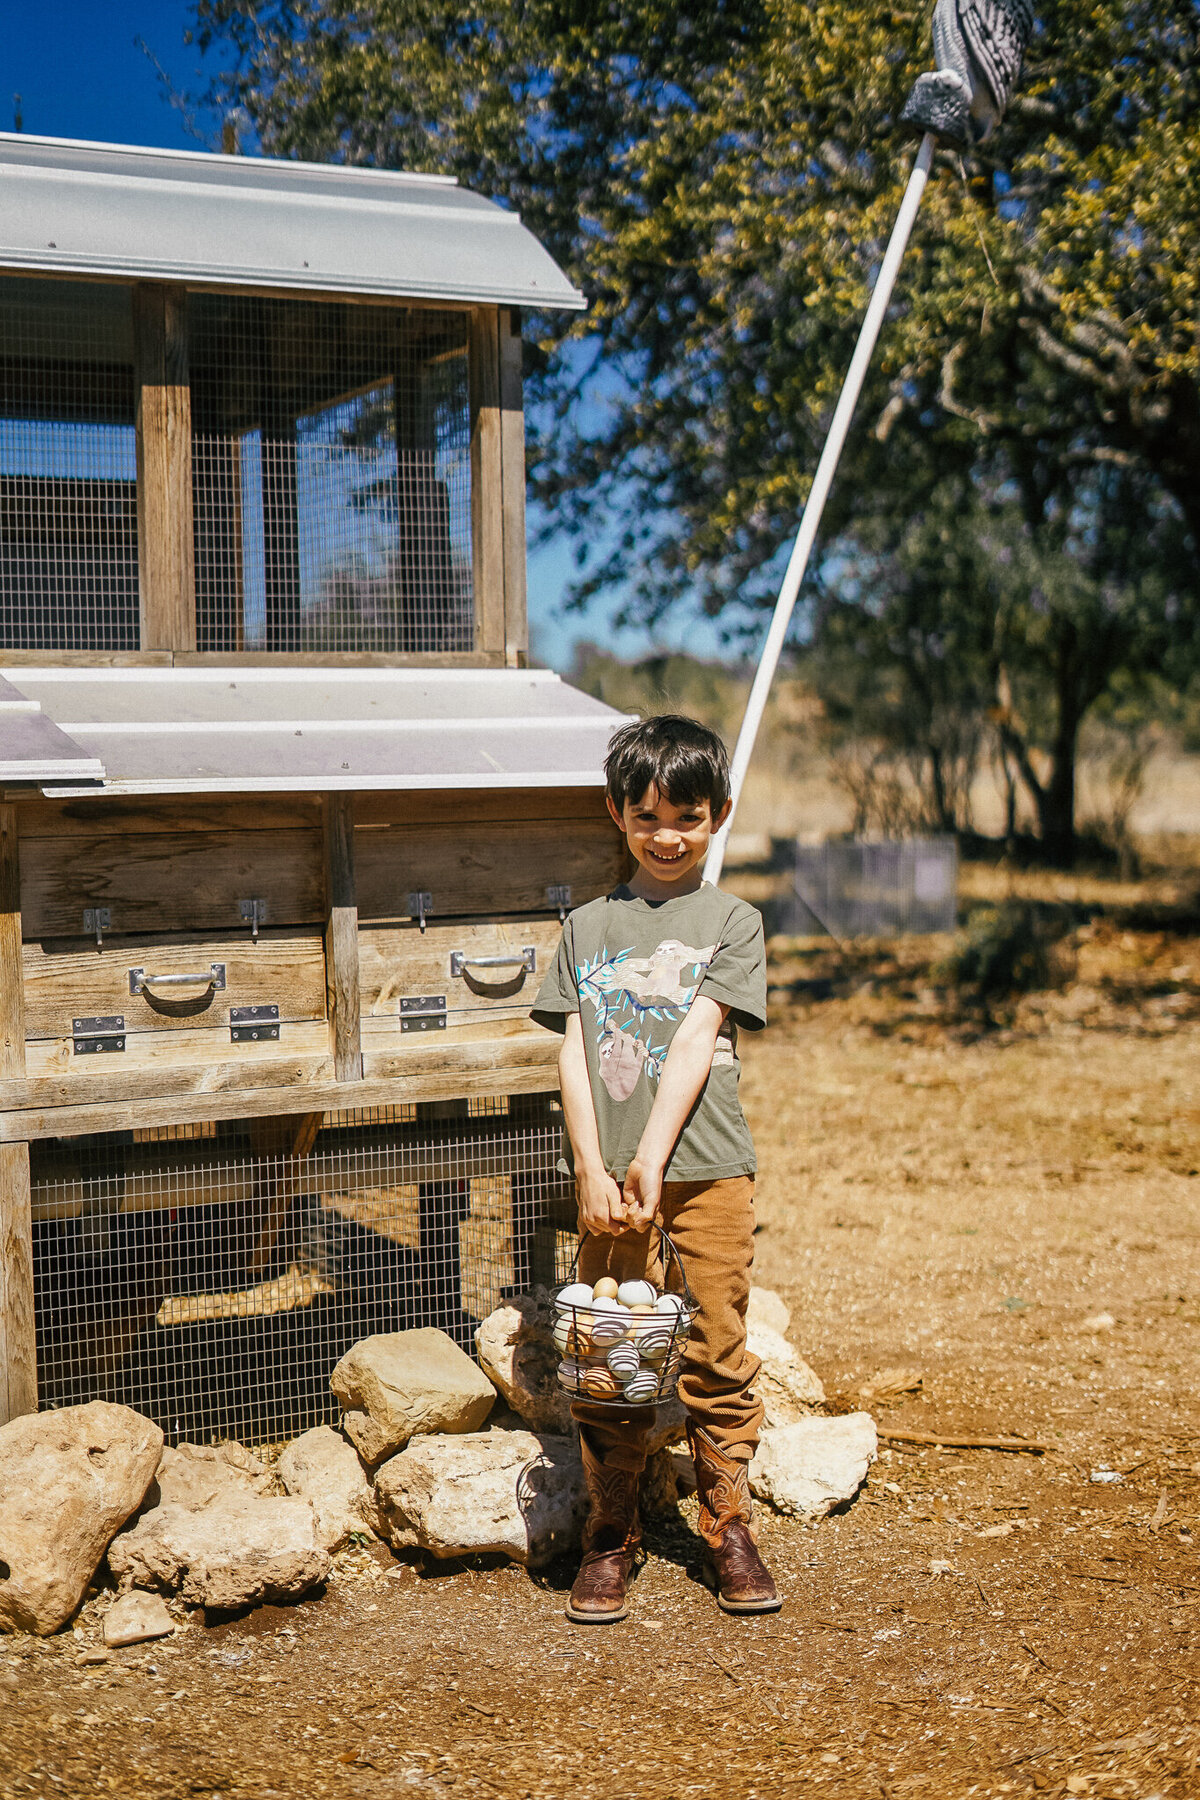 Young boy with a basket of eggs standing next to a chicken coop